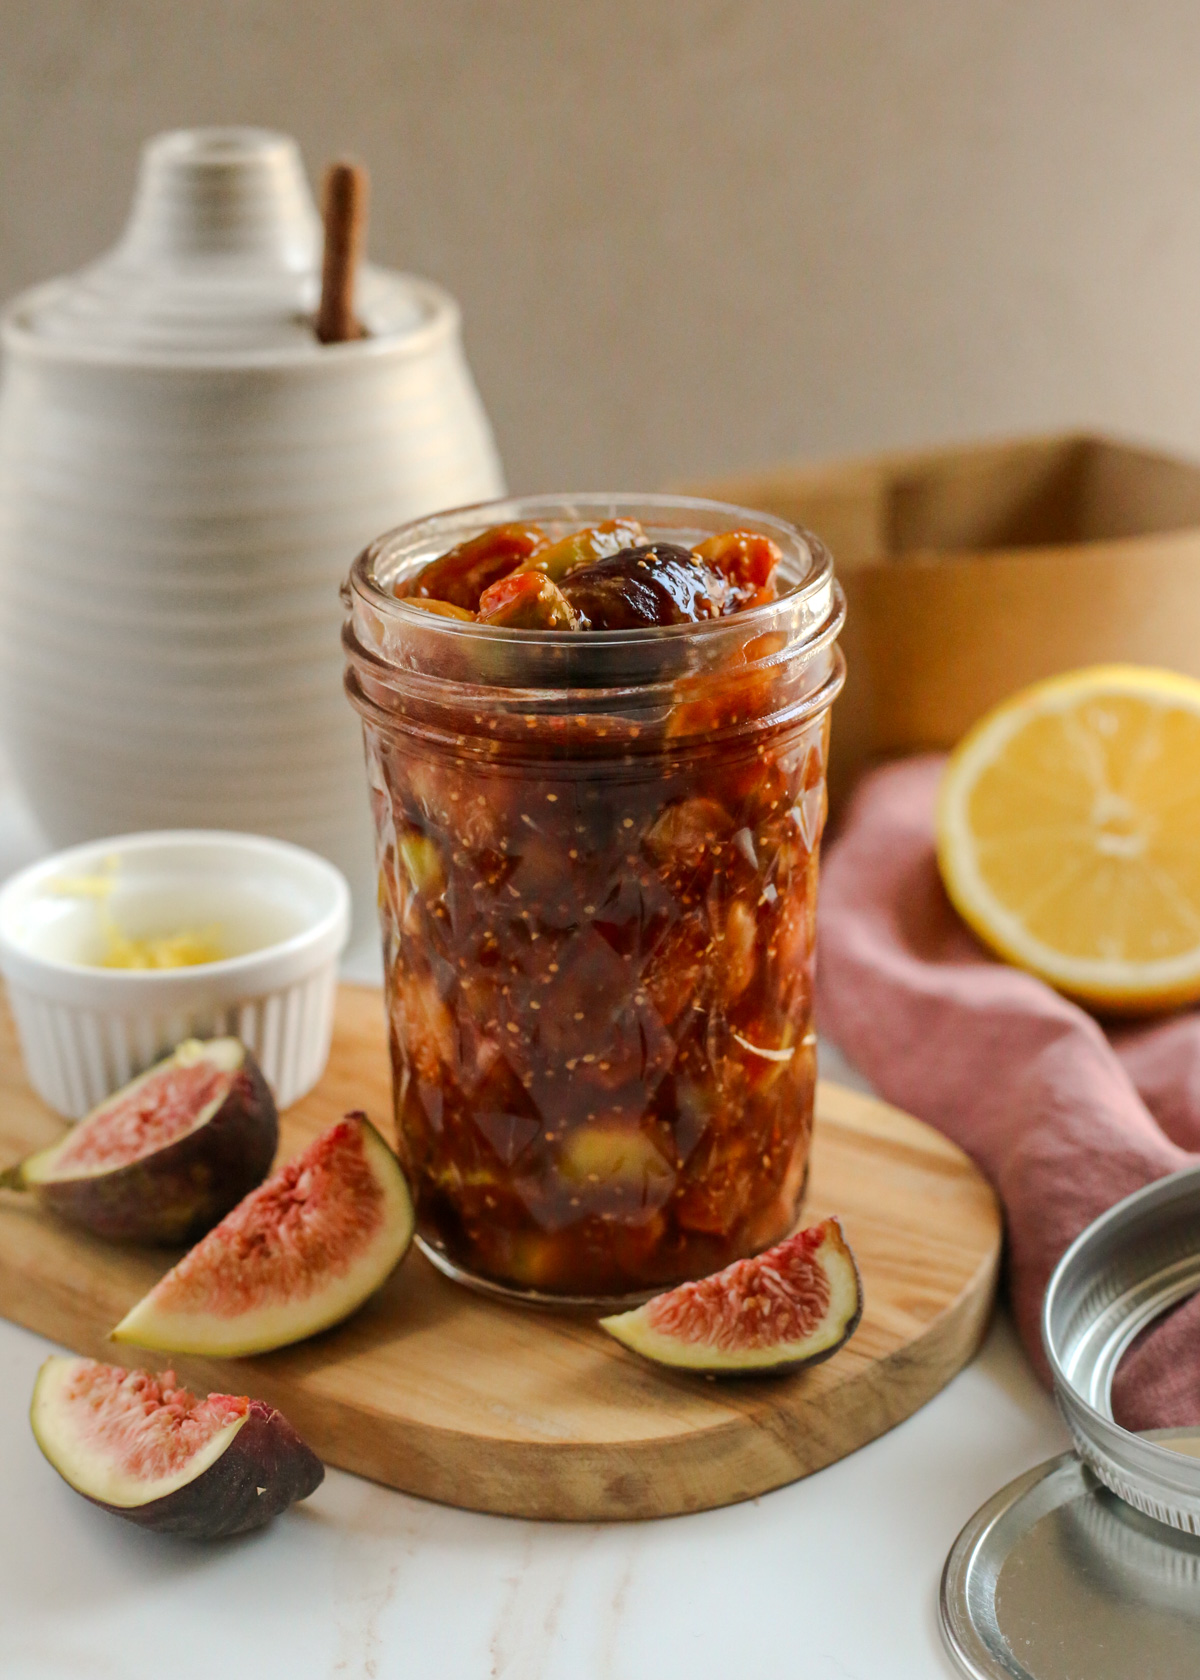 A close view of a balsamic fig compote recipe in a mason jar, with chunks of sweet balsamic glazed figs visible throughout, and additional ingredients and kitchen tools scattered in the background